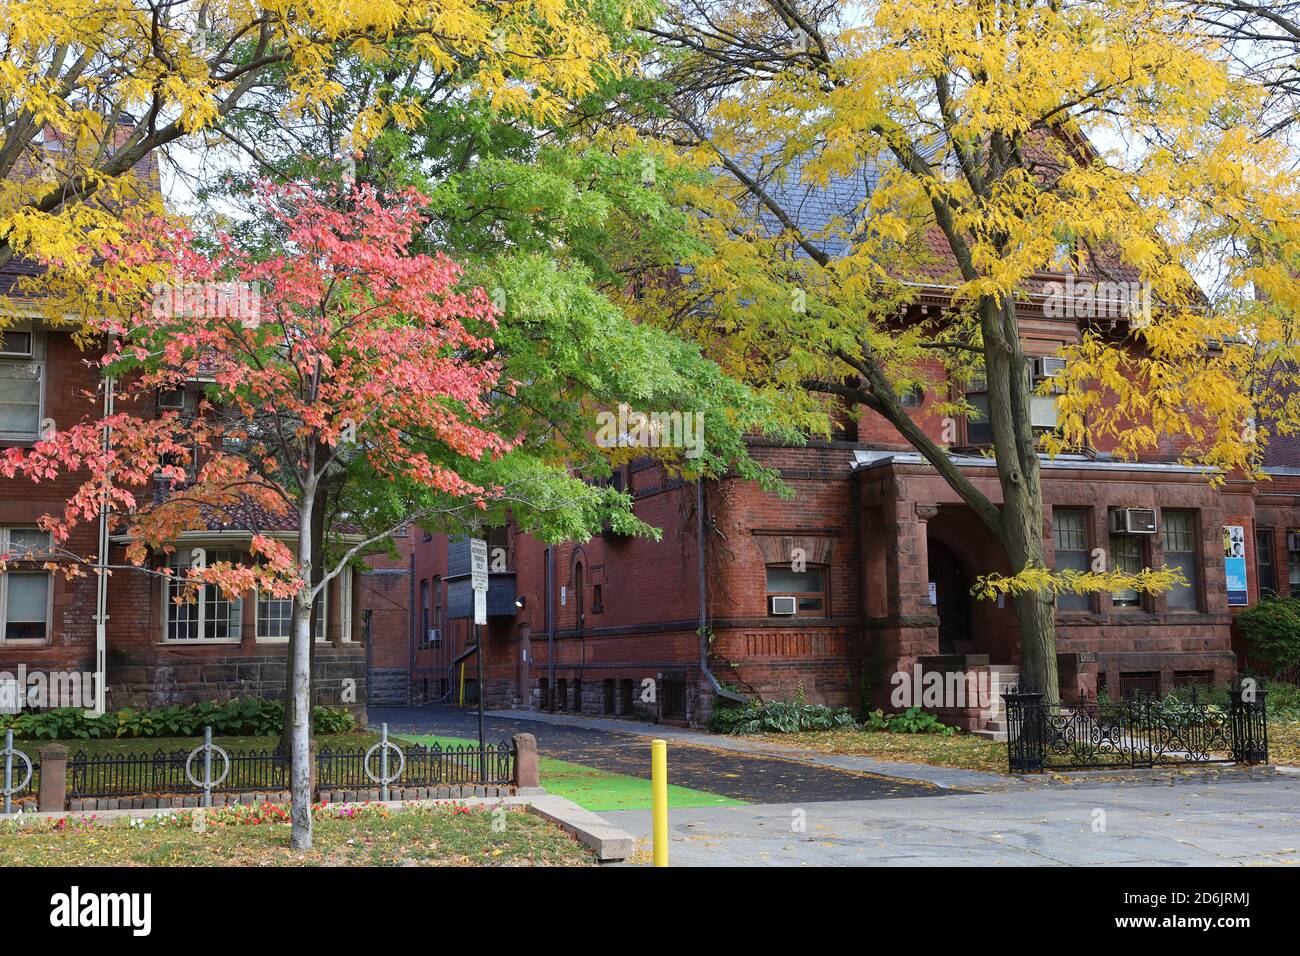 Toronto, Canada - October 16, 2020: University of Toronto campus, old mansions converted into university buildings with trees in fall colors Stock Photo